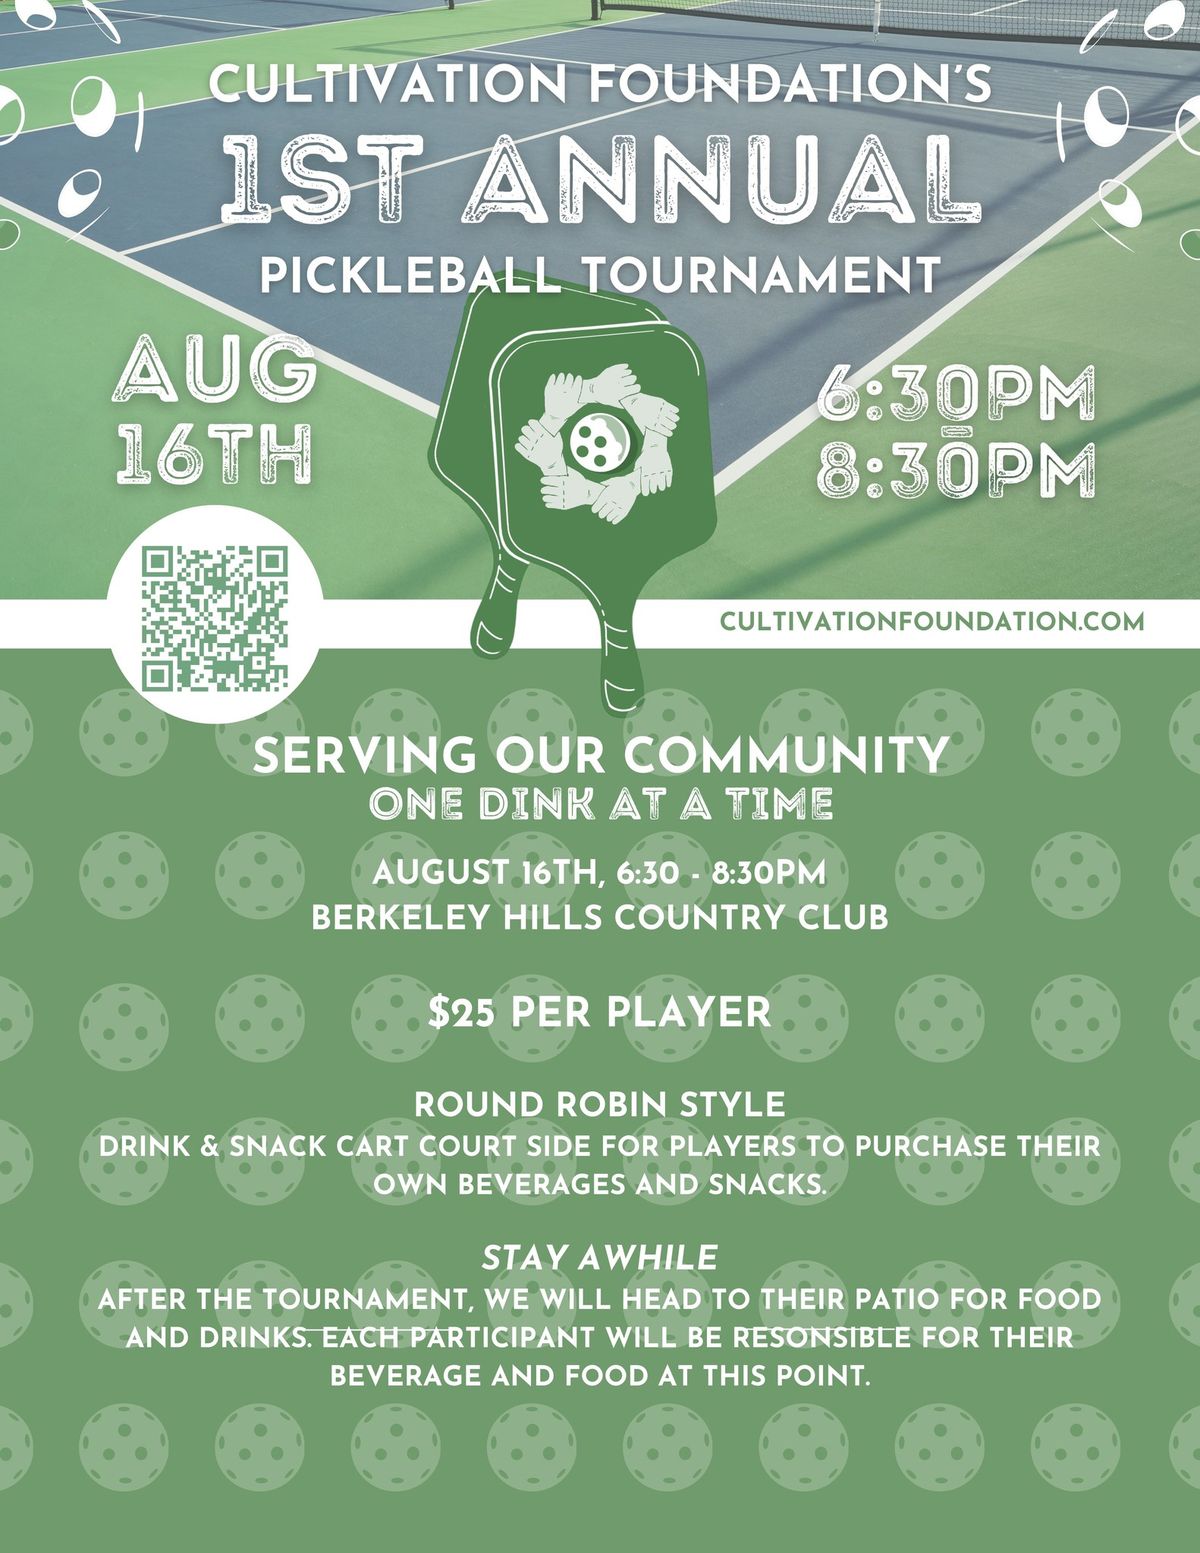 Cultivation Foundation\u2019s 1st Annual Pickleball Fundraising Tournament